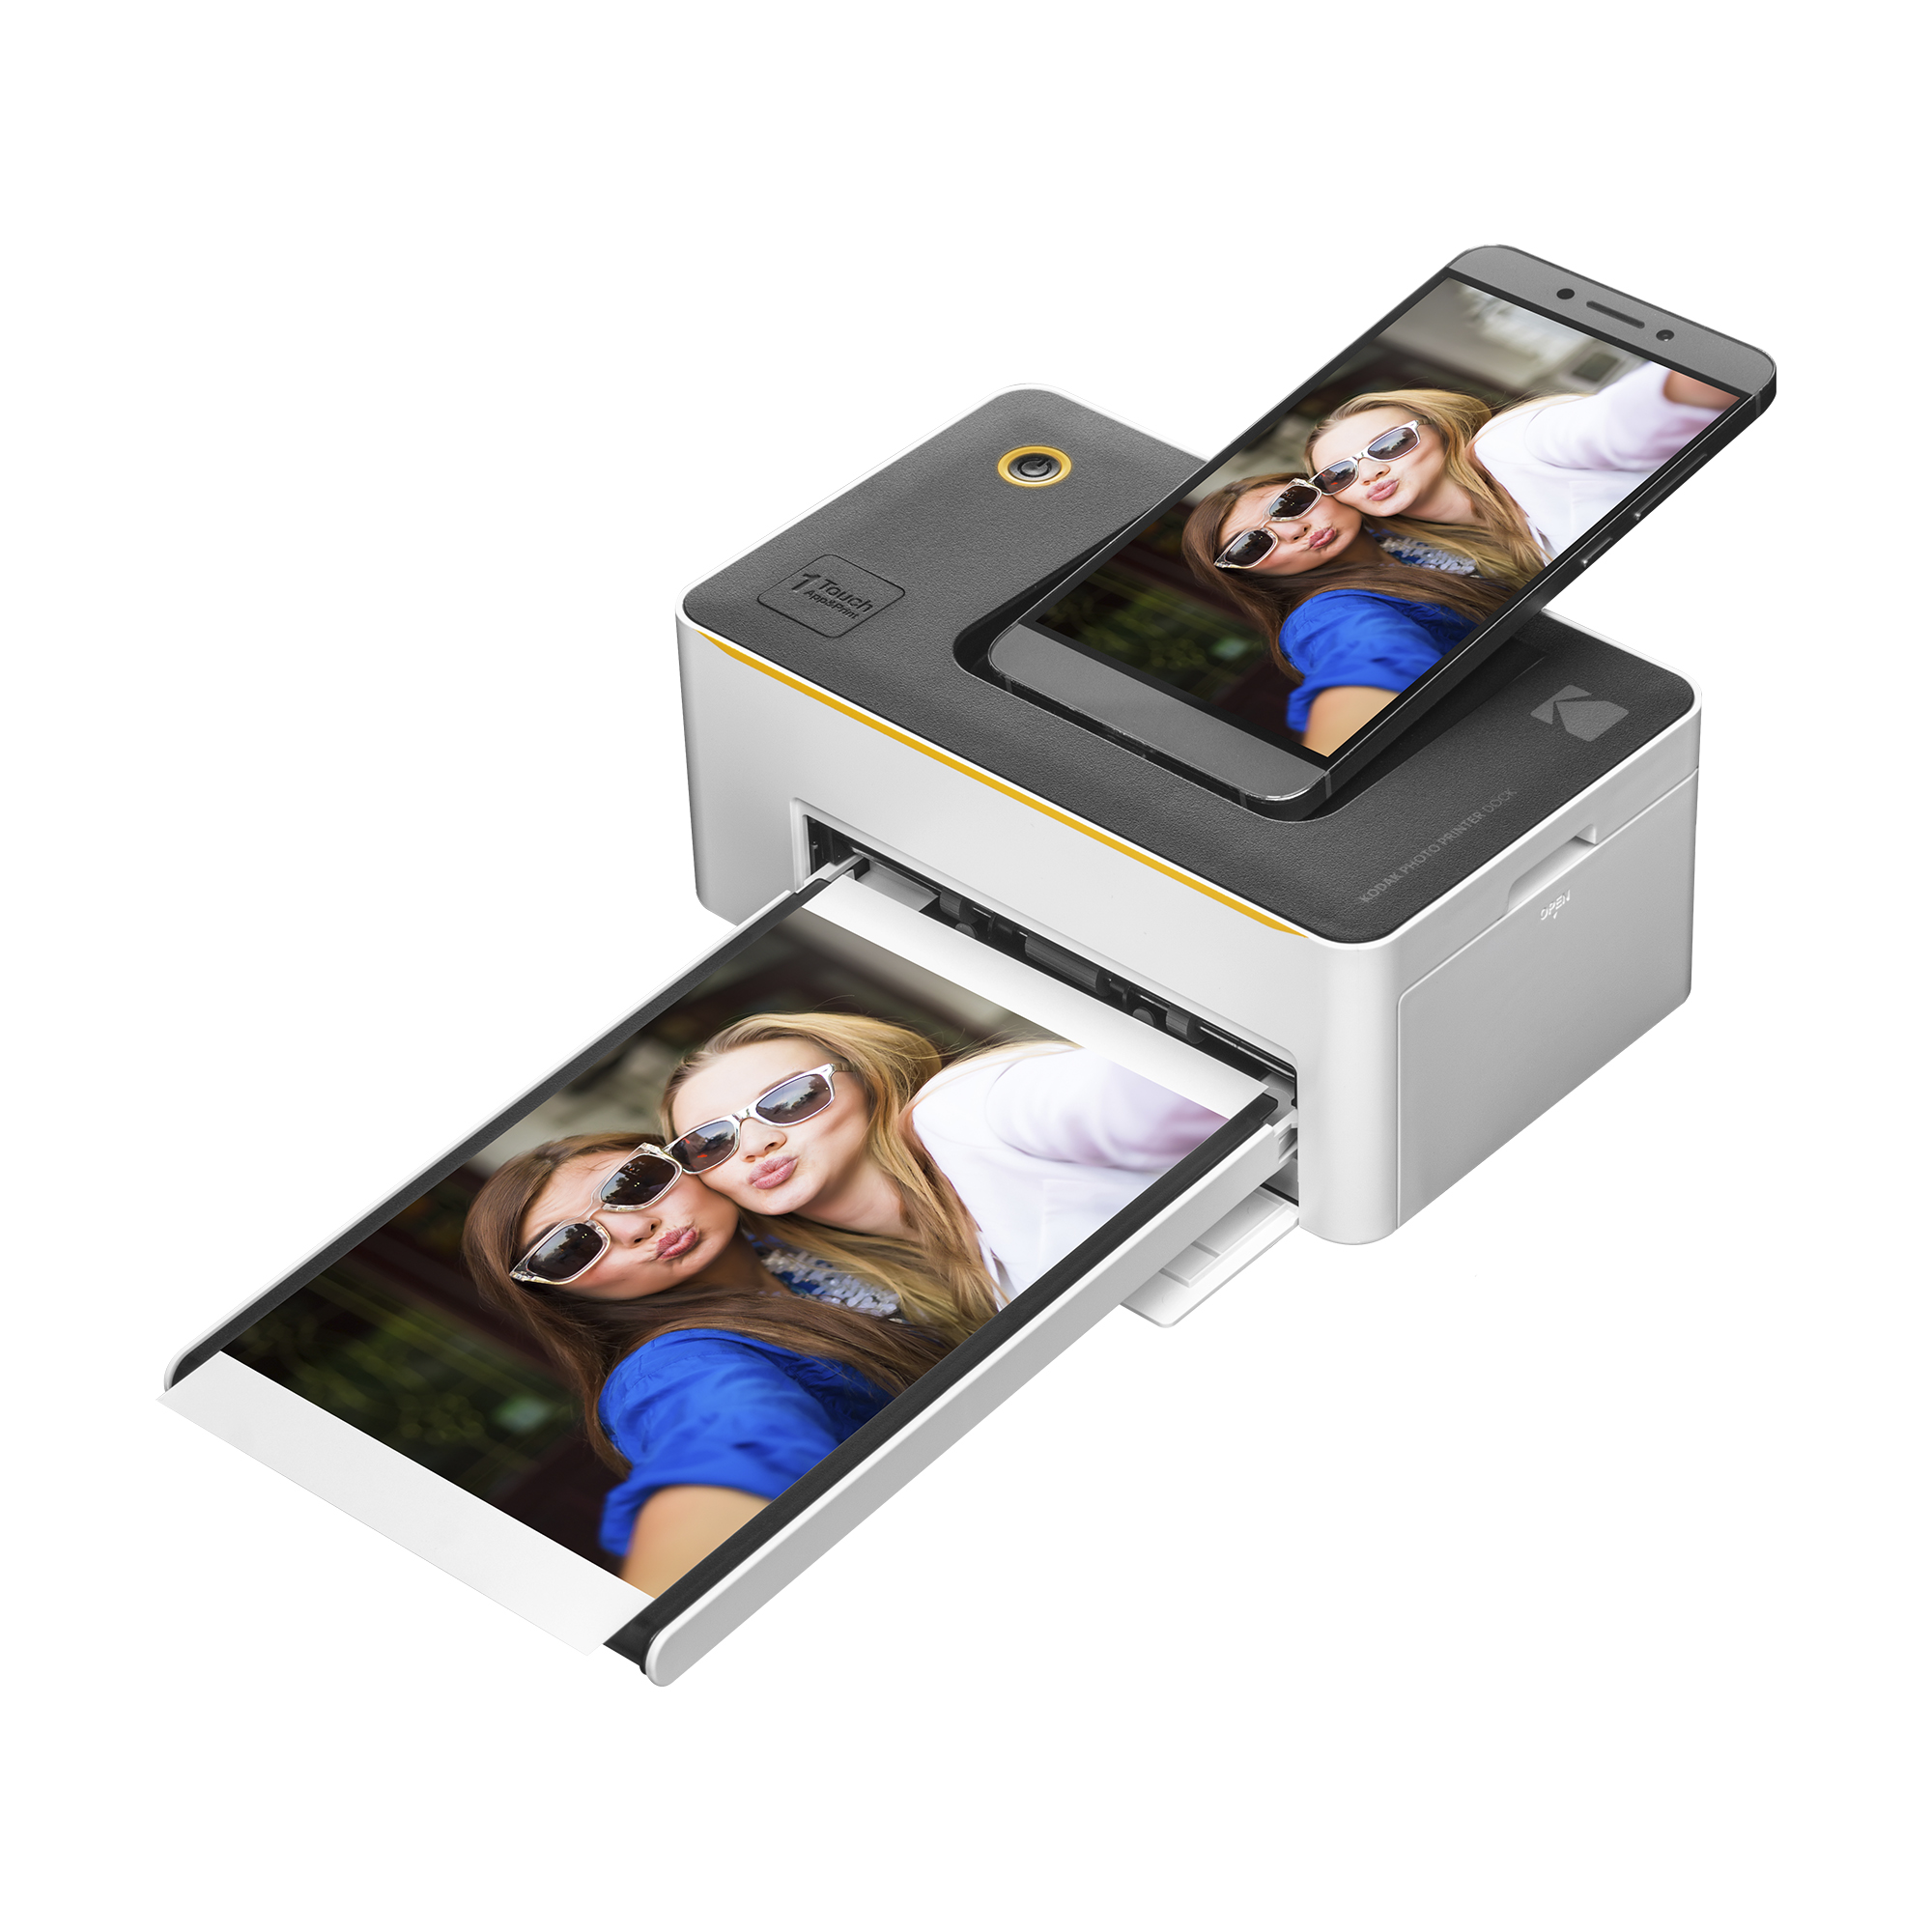 Kodak Dock Plus 4x6" Portable Photo Printer for iOS/Android, Gold PD450BT - image 1 of 4